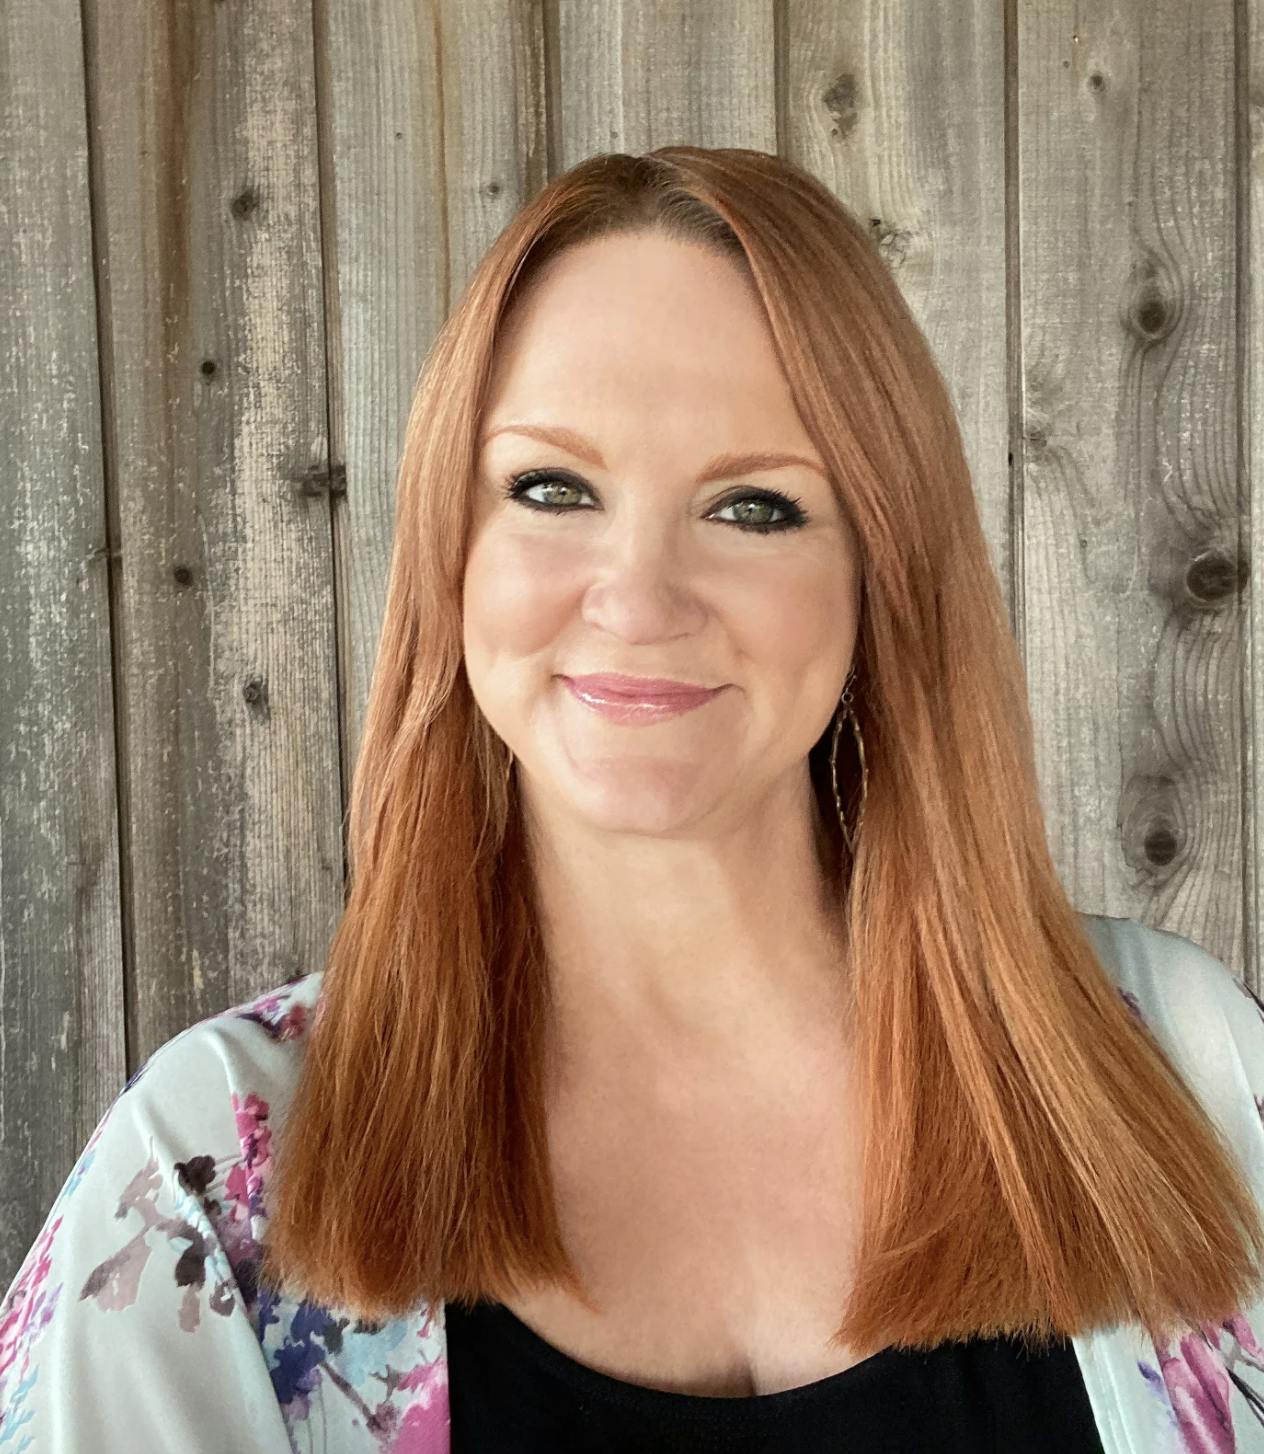 Ree Drummond on Microwaved Ding Dongs and Other Real-Life Cooking